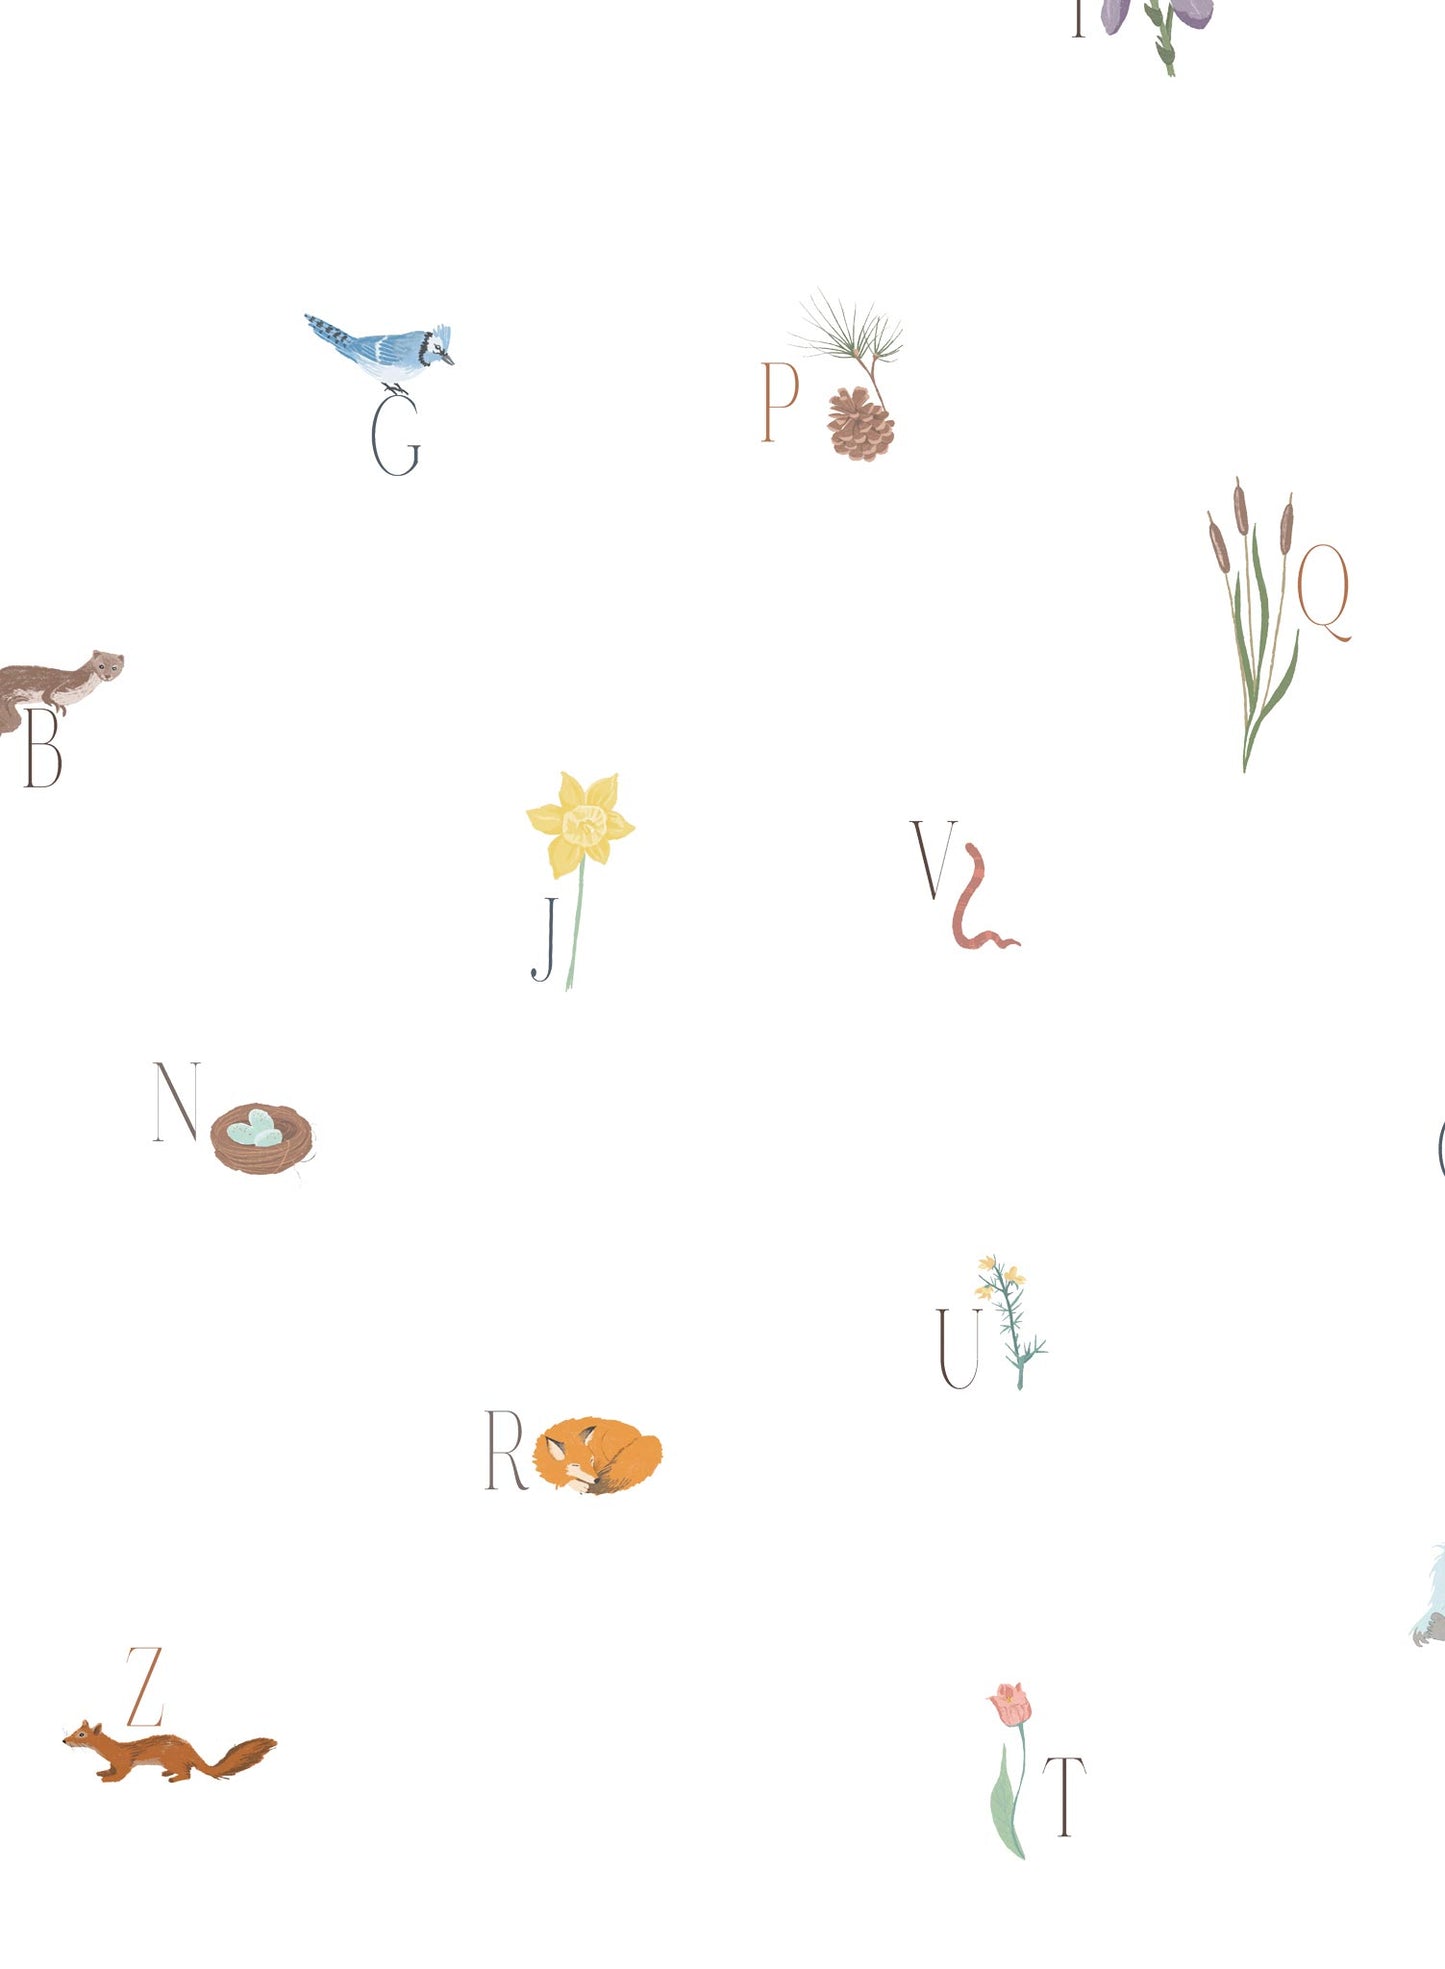 Woodland Lesson in French is a Minimalist wallpaper by Opposite Wall of an alphabet with an animal & forest them